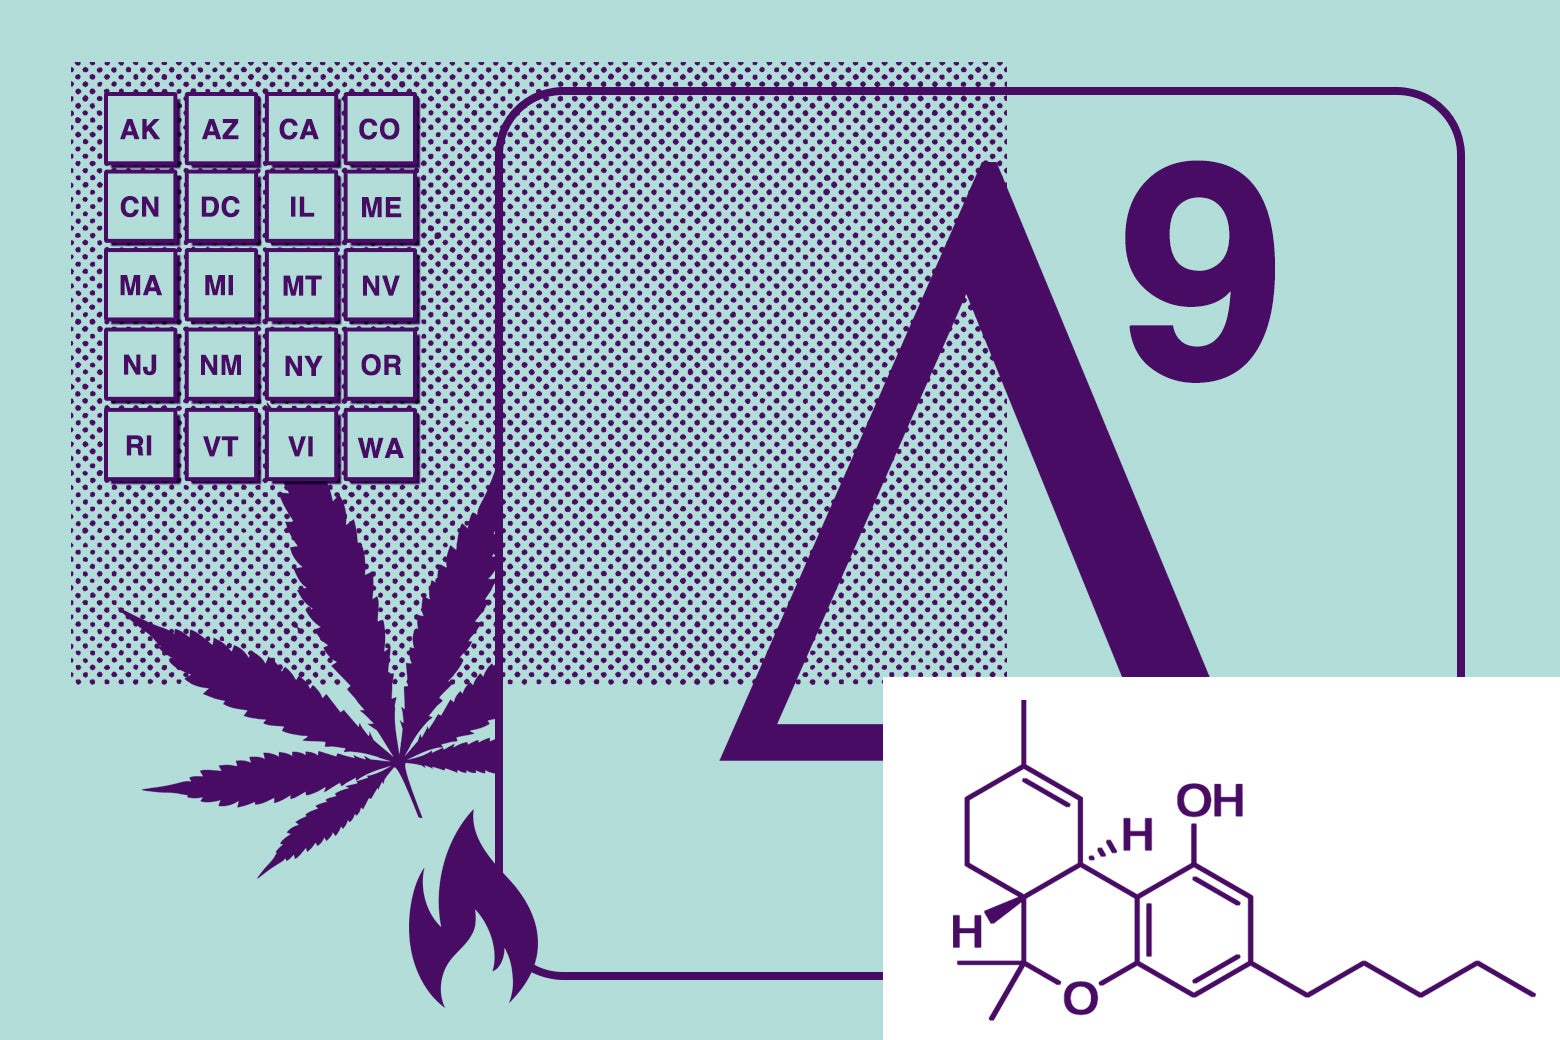 The delta-9 leaf symbol is seen along with its chemical structure, a flame, a pot leaf, and a list of state initials.